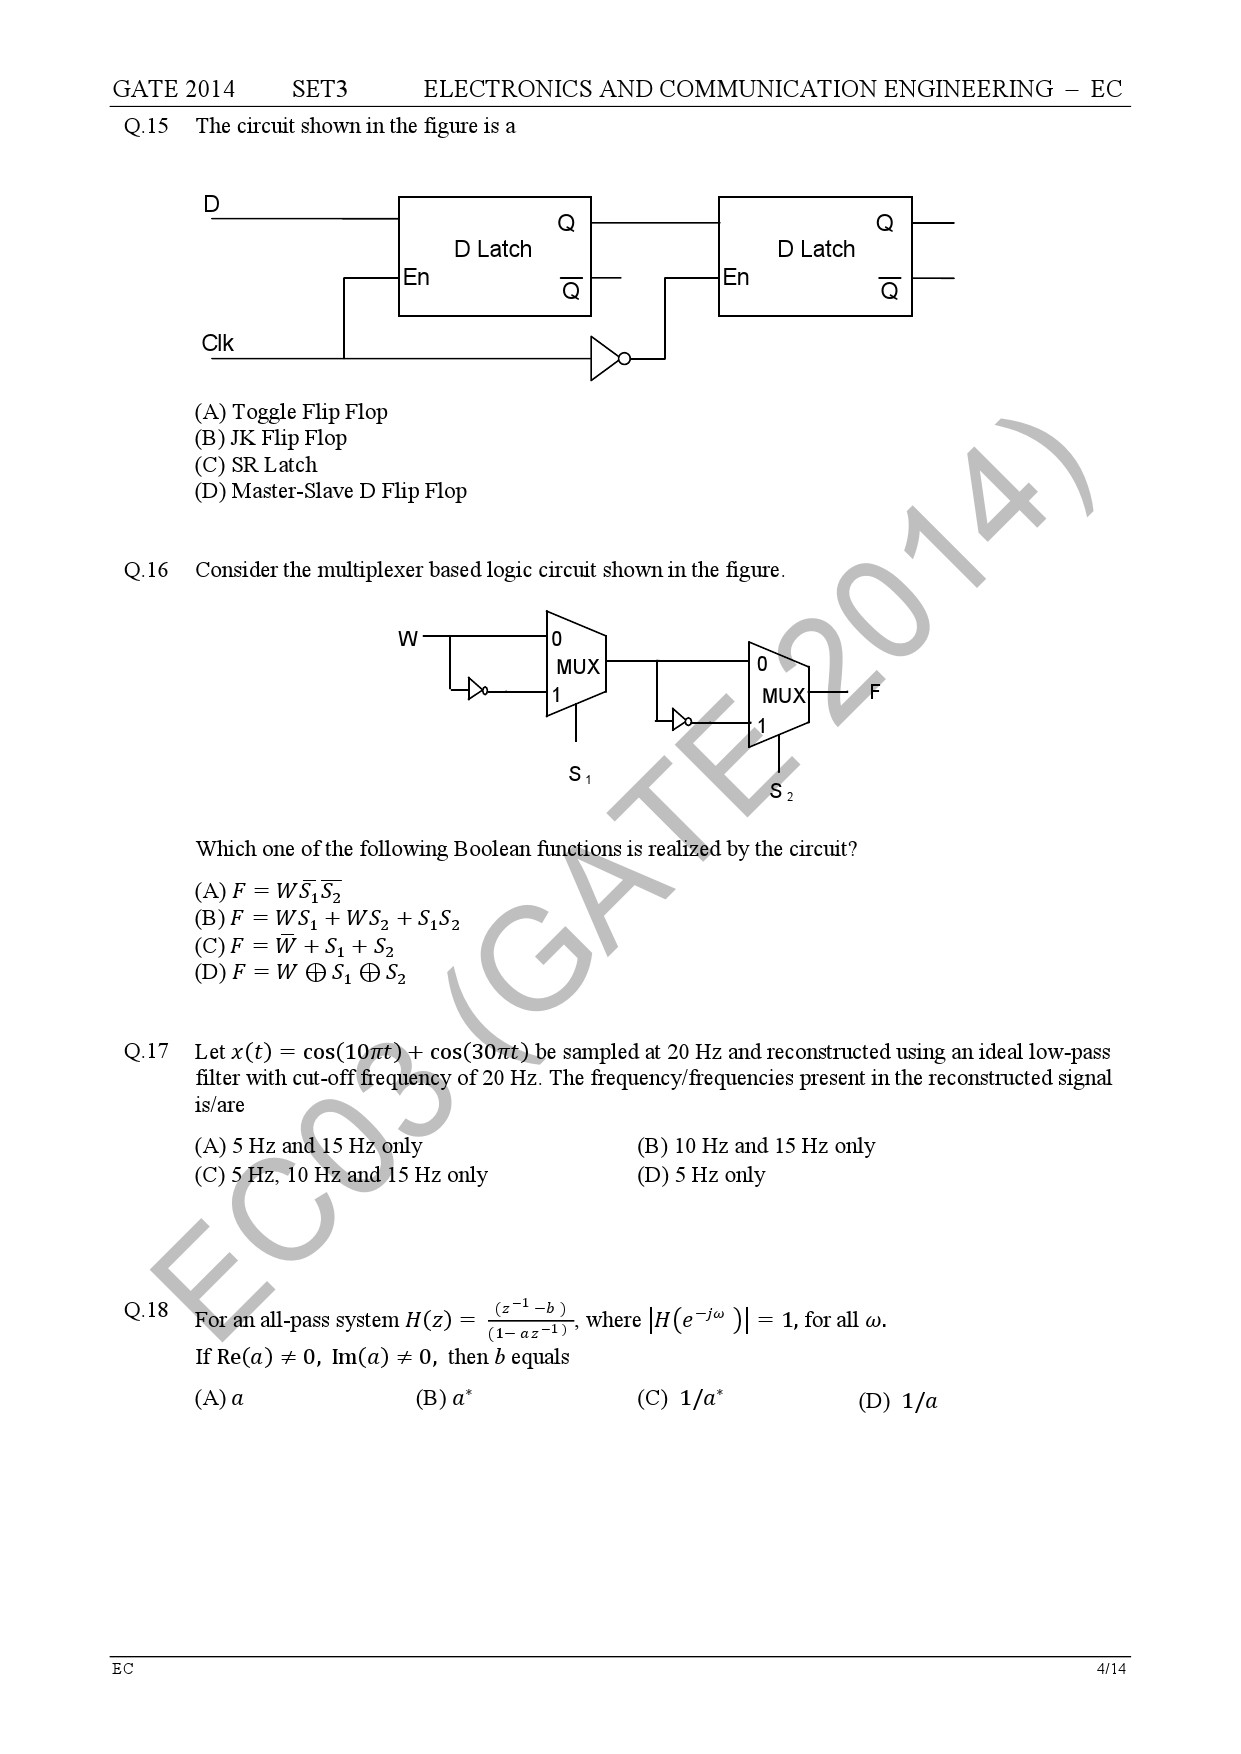 GATE Exam Question Paper 2014 Electronics and Communication Engineering Set 3 11